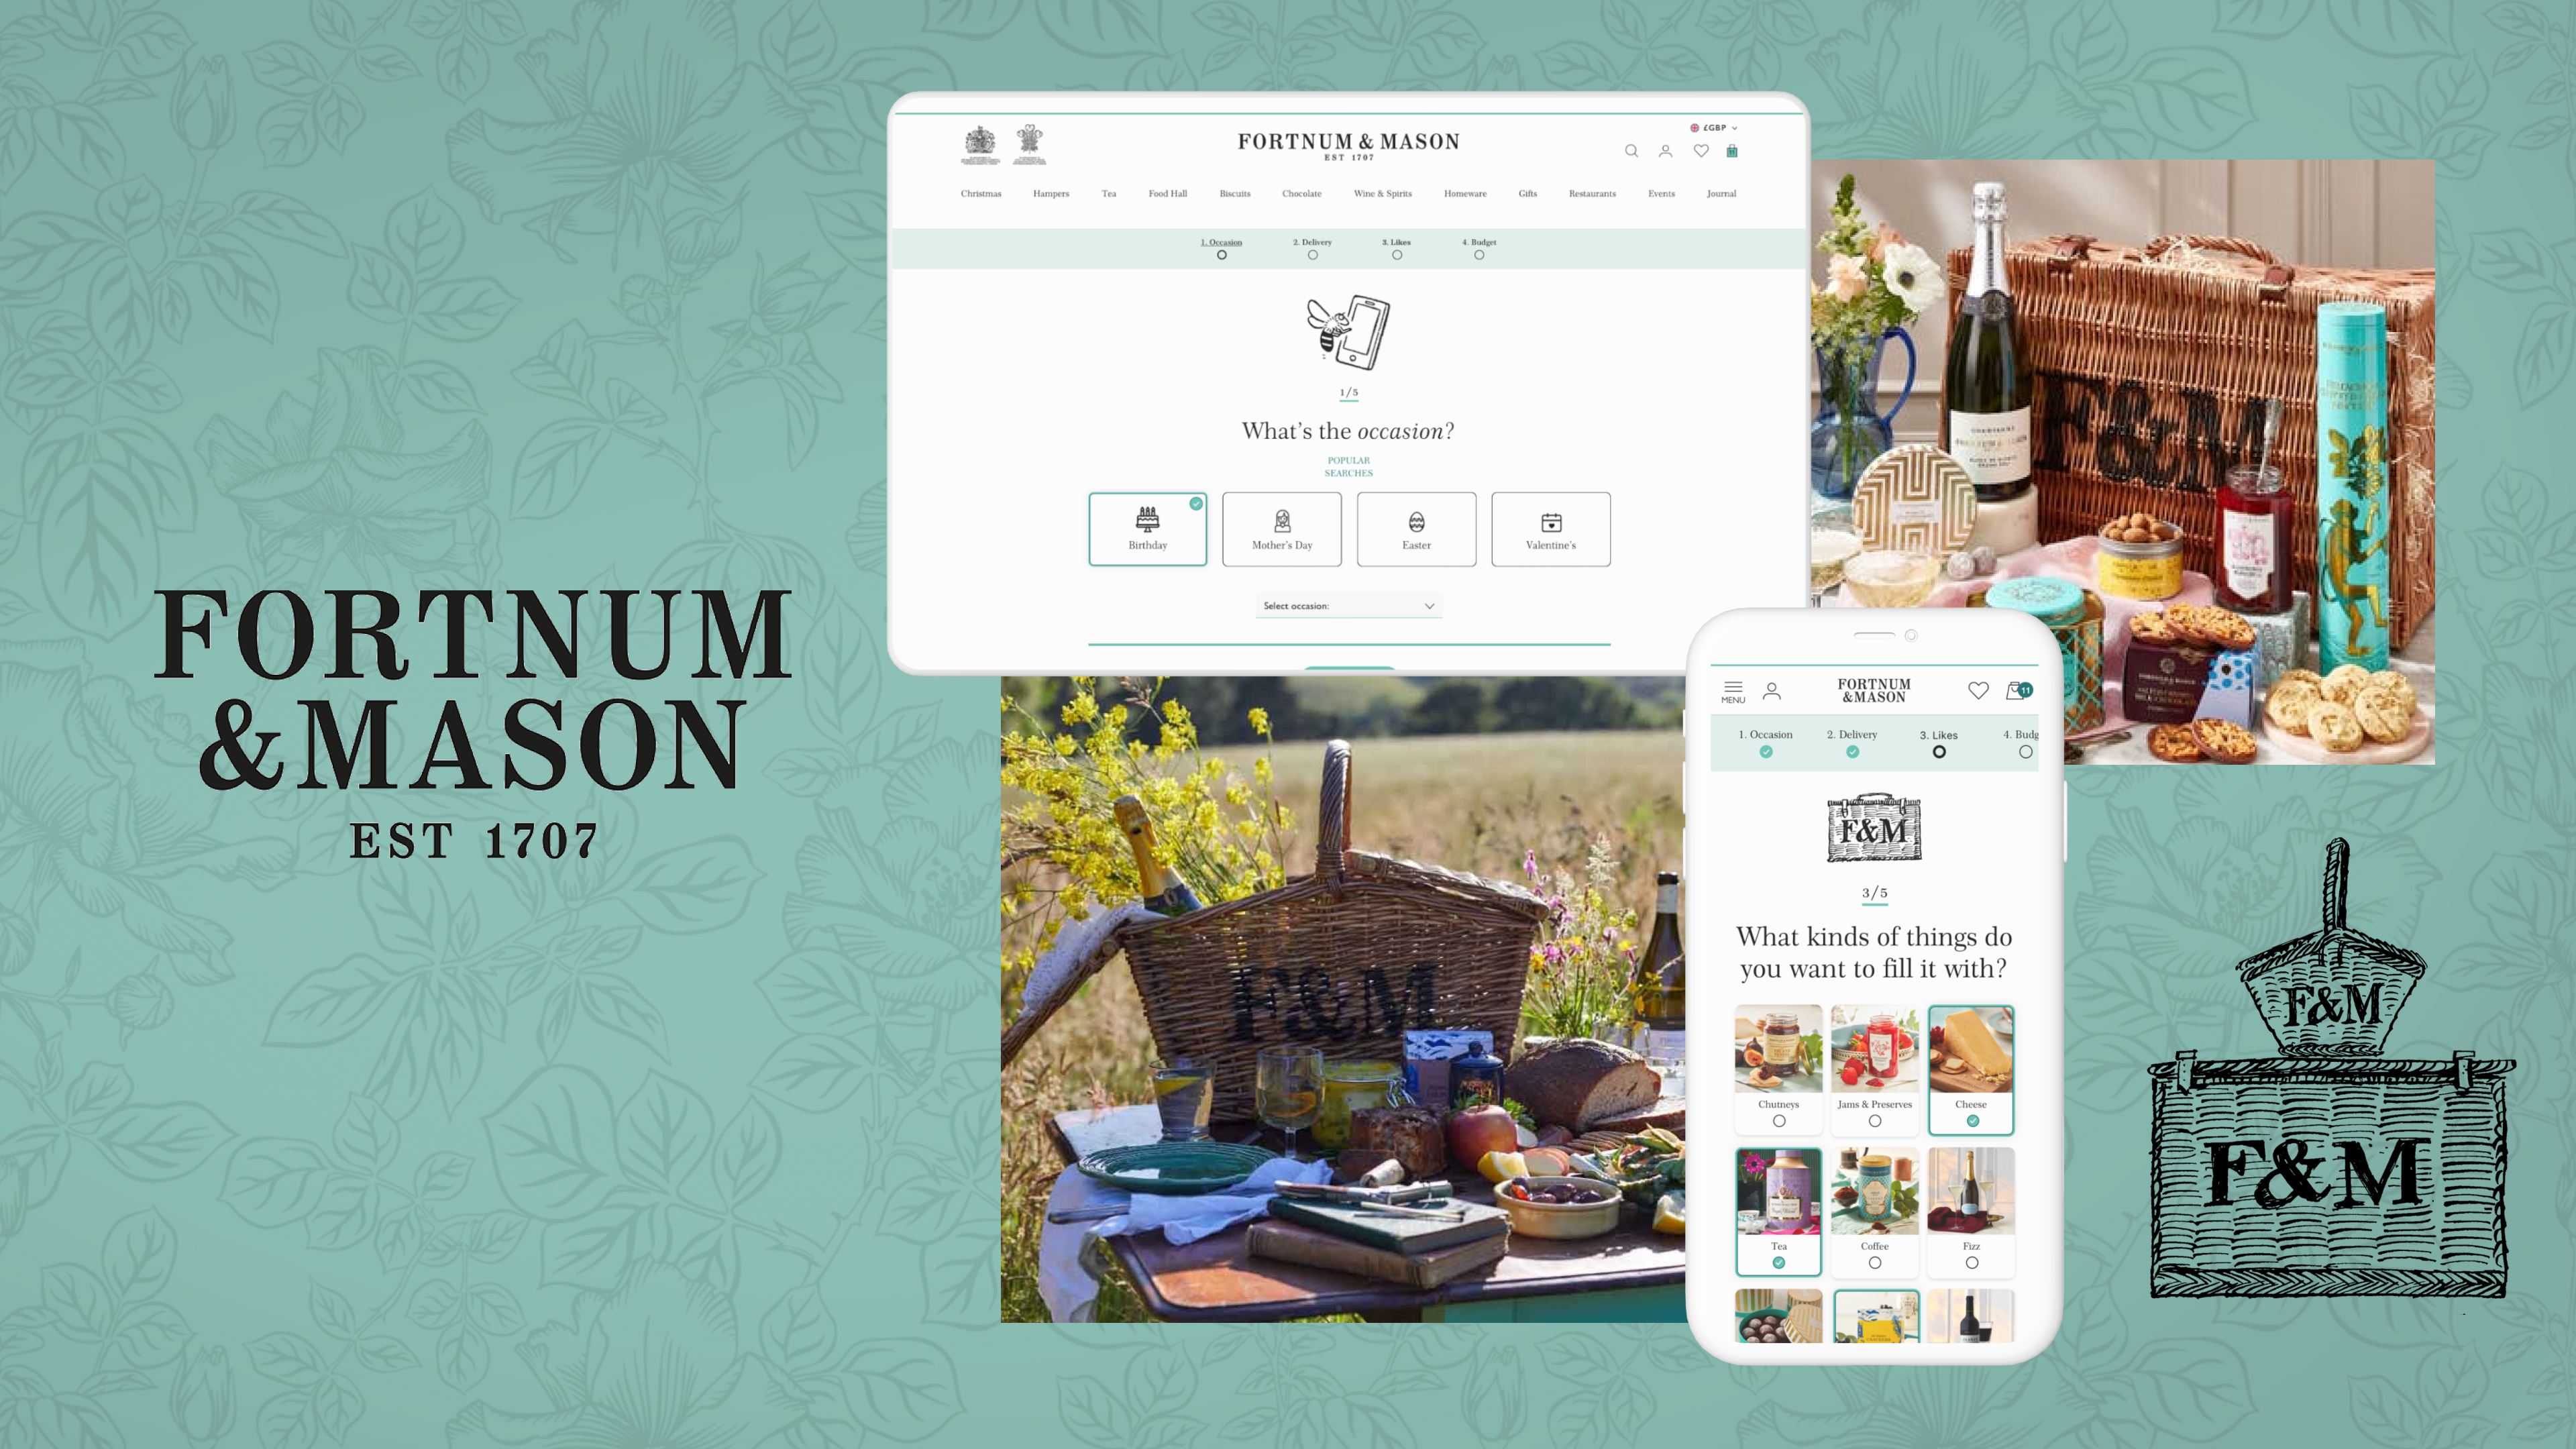 Desktop and mobile screens showing the online hamper finder tool on the Fortnum & Mason website alongside photos of the iconic wicker hampers with food and drink inside them